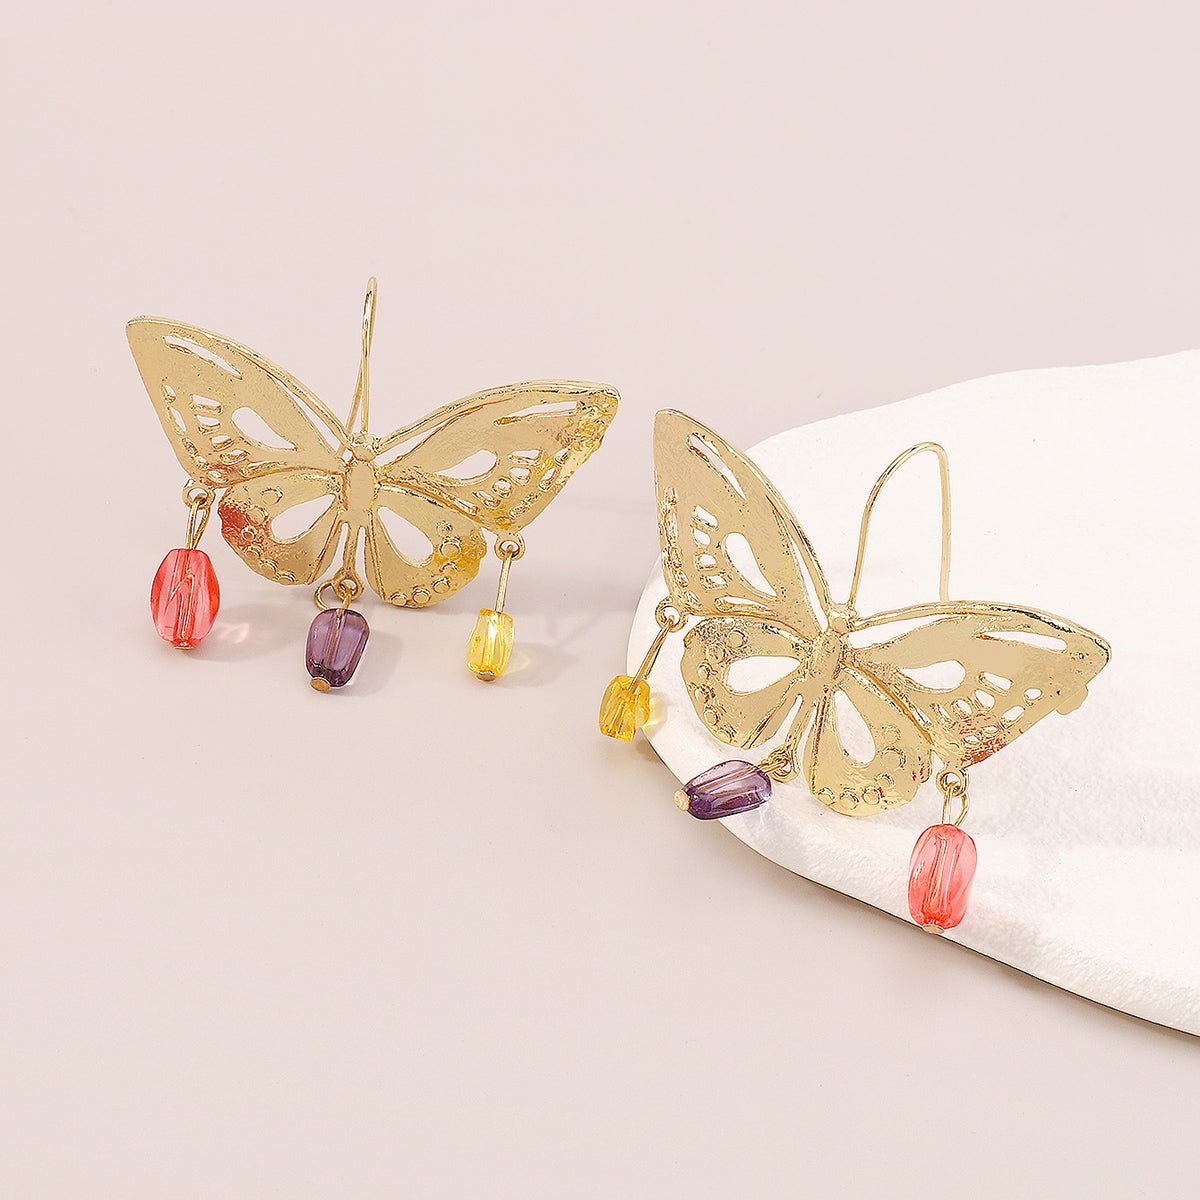 Exaggerated Metal Cutout Butterfly Dangle Earrings medyjewelry